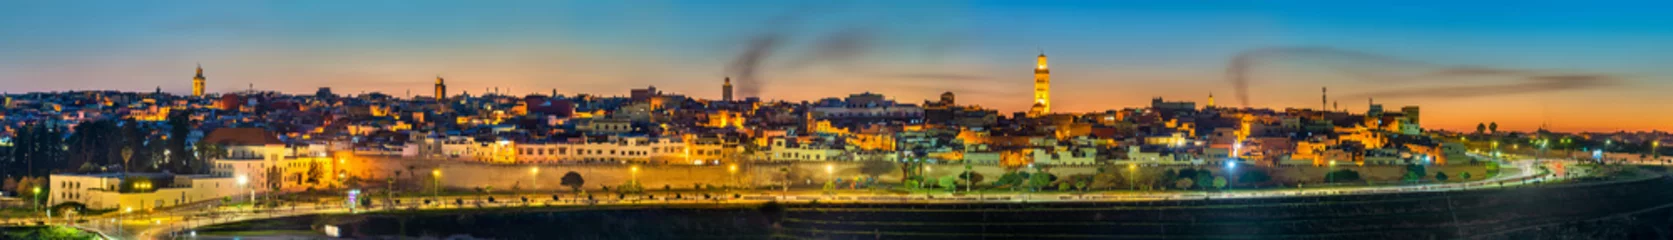 Rollo Panorama of Meknes in the evening - Morocco © Leonid Andronov